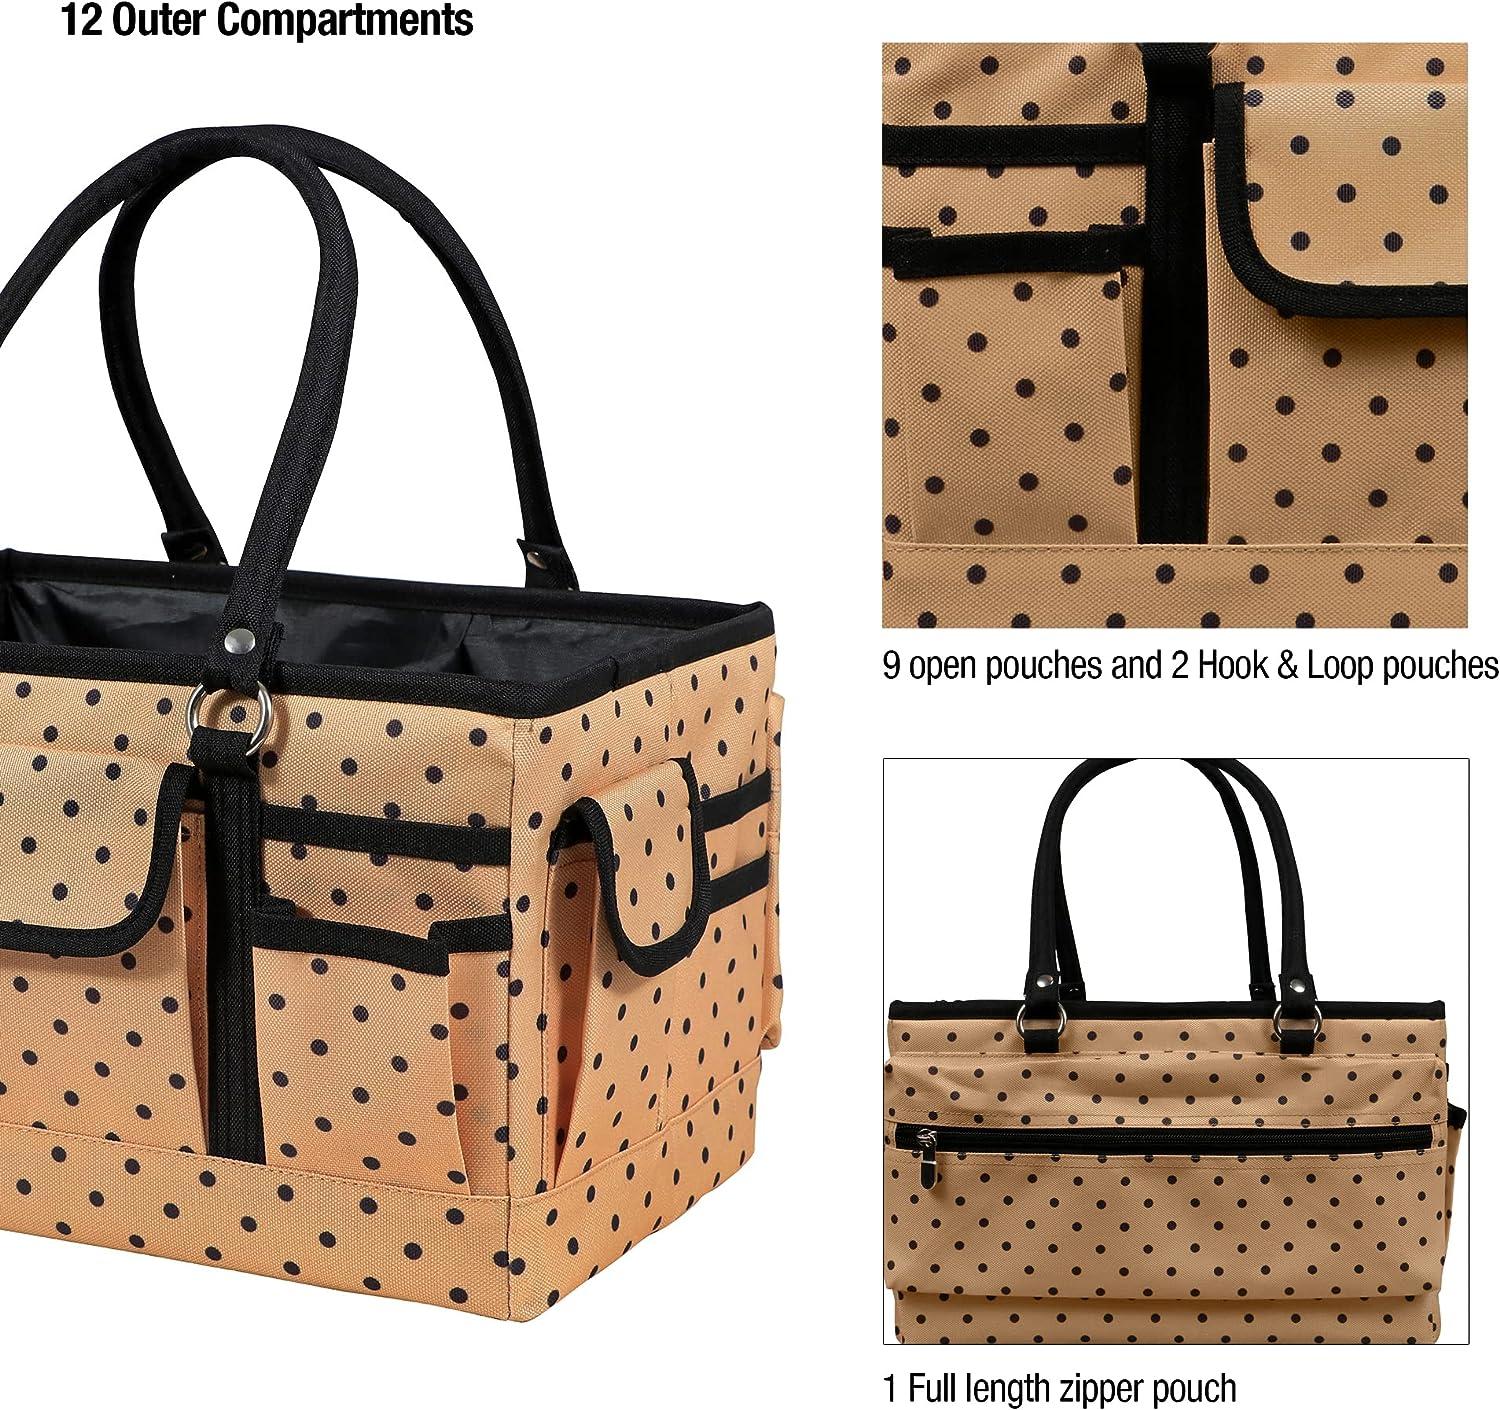 Singer Collapsible Deluxe Store & Tote Caddy-Tropical Animal Print